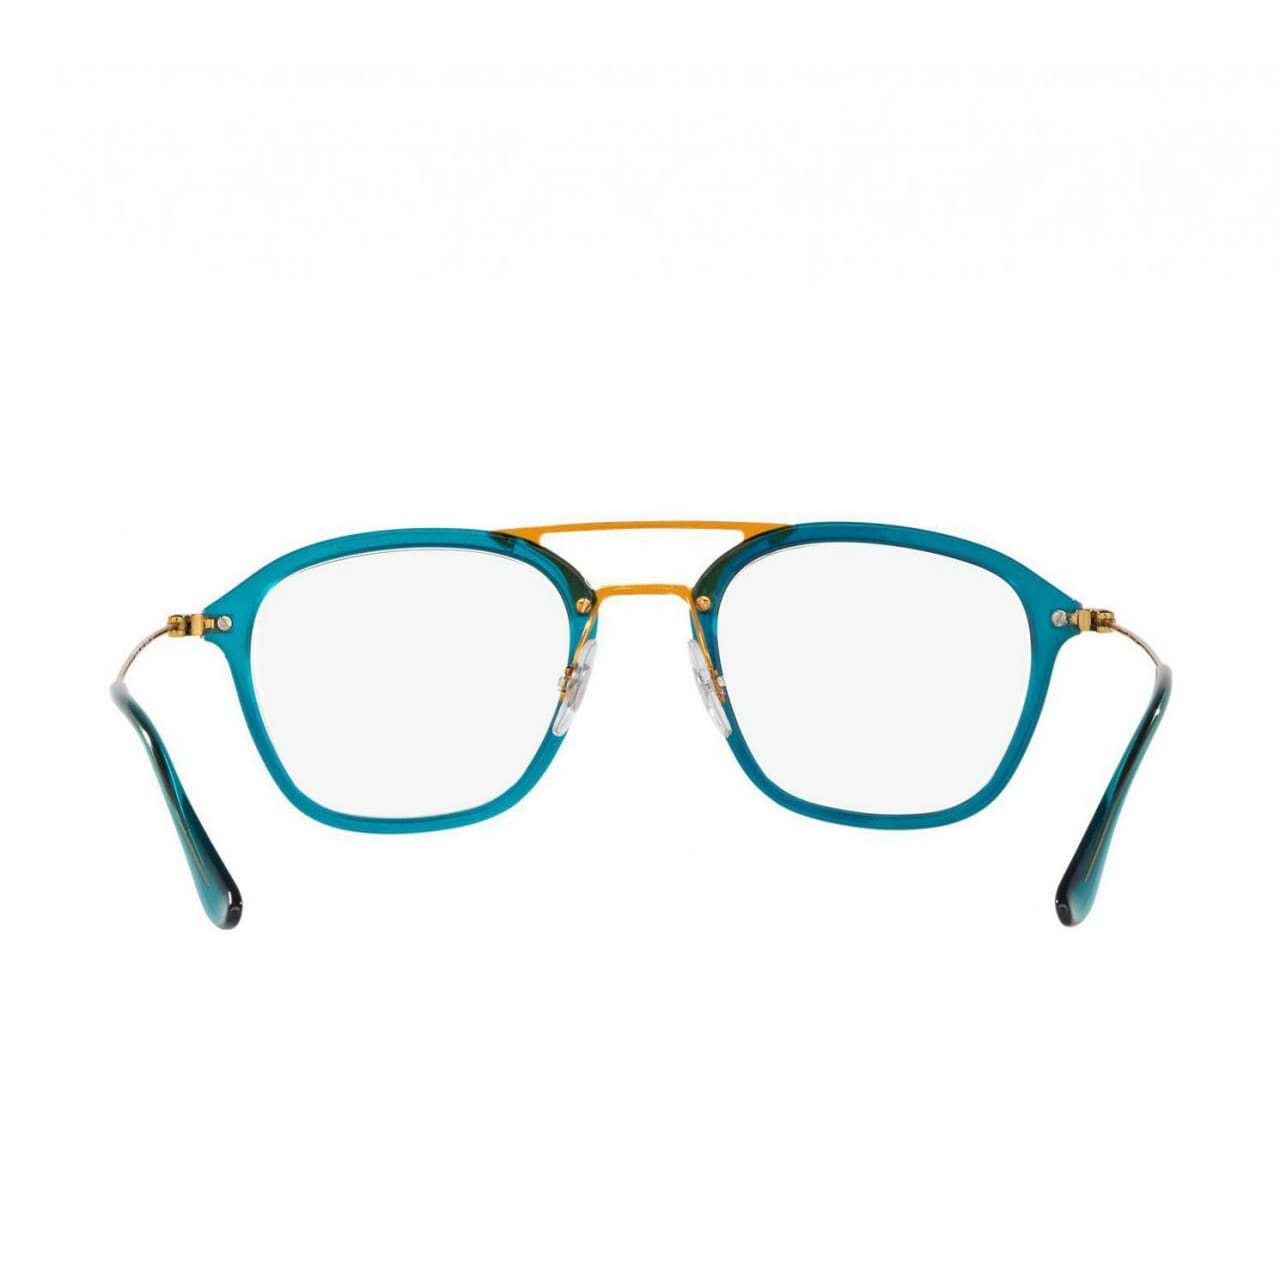 Ray-Ban RB7098 5632 Blue with Bronze Copper Full Rim Square Injected Optical Frames 8053672603750